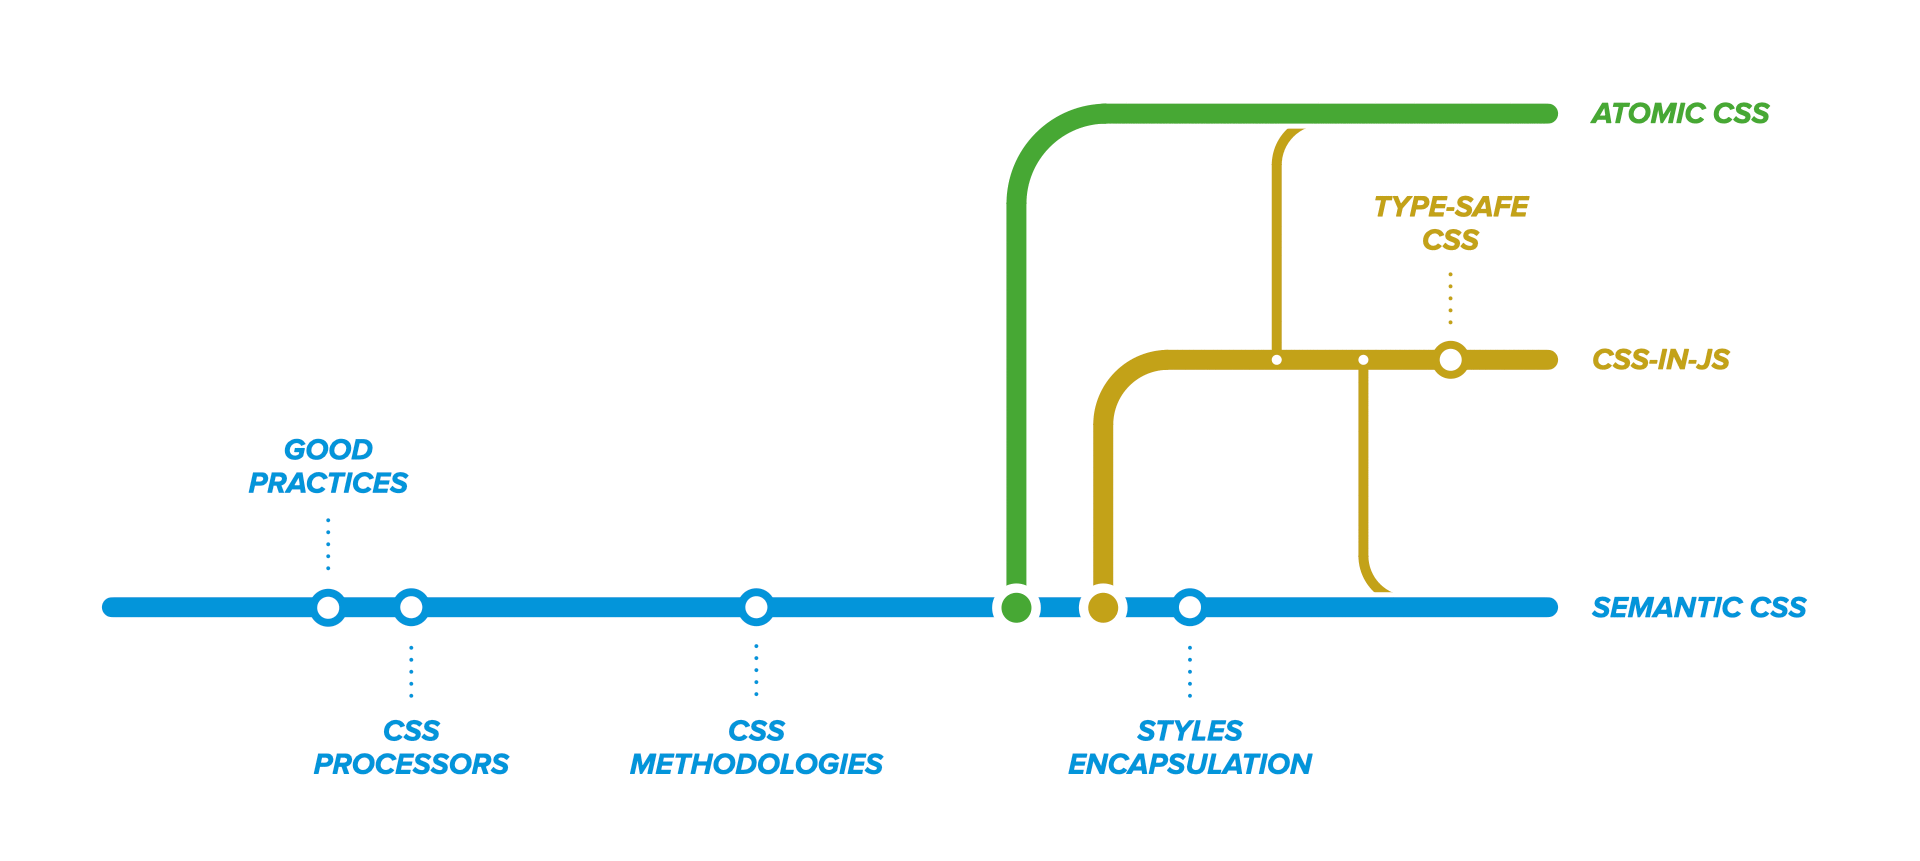 Timeline of scalable CSS evolution, depicting important milestones such as good practices, CSS processors, CSS methodologies, styles encapsulation, but also turning points like Atomic CSS (in green) and CSS-in-JS (in yellow), branching from the main timeline of Semantic CSS (in blue)